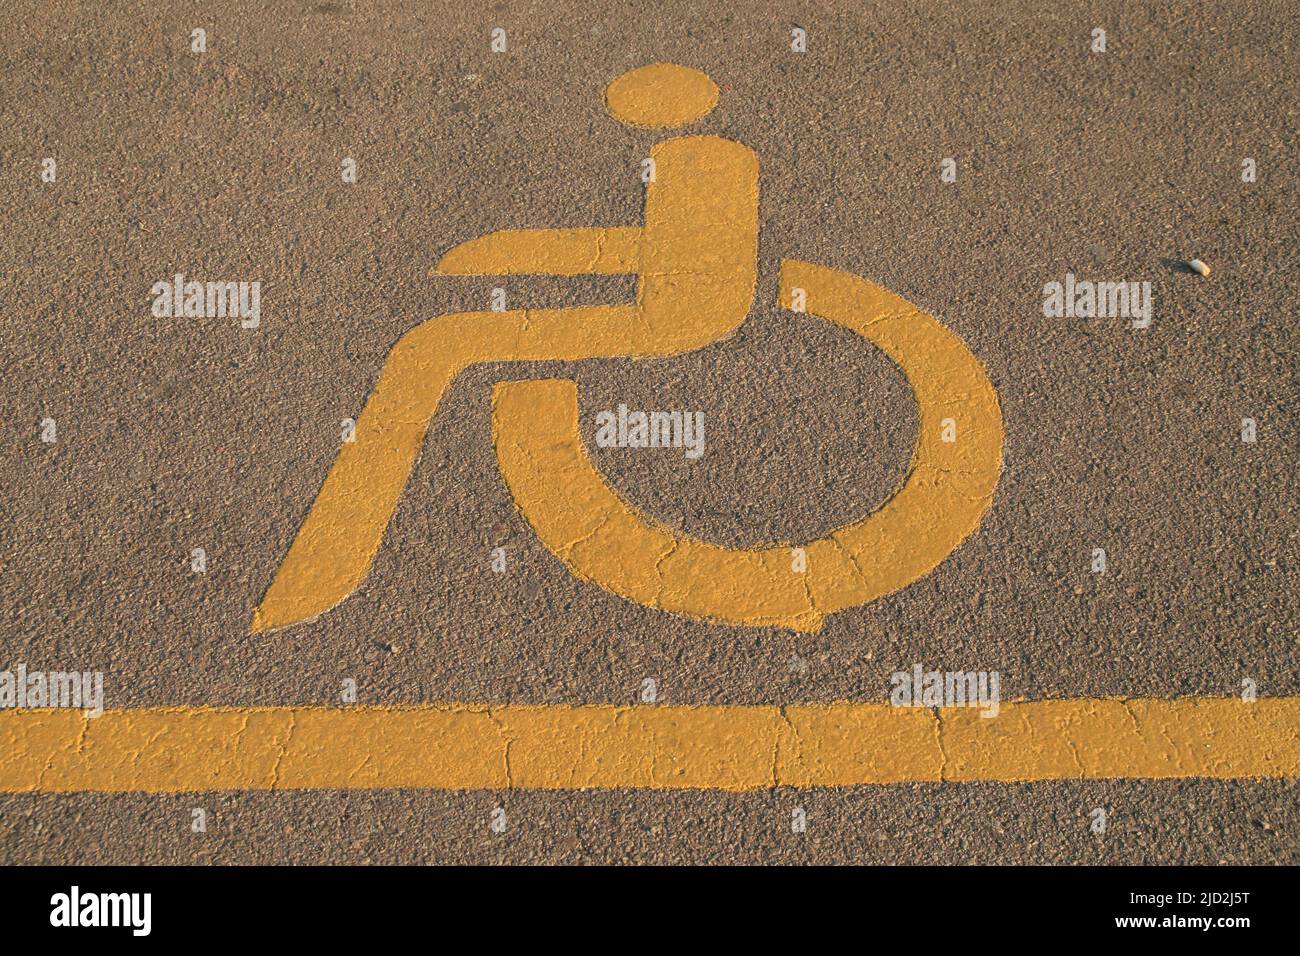 Parking reserved for disabled icon on parking lot floor, Pretoria/Tshwane, Gauteng, South Africa. Stock Photo